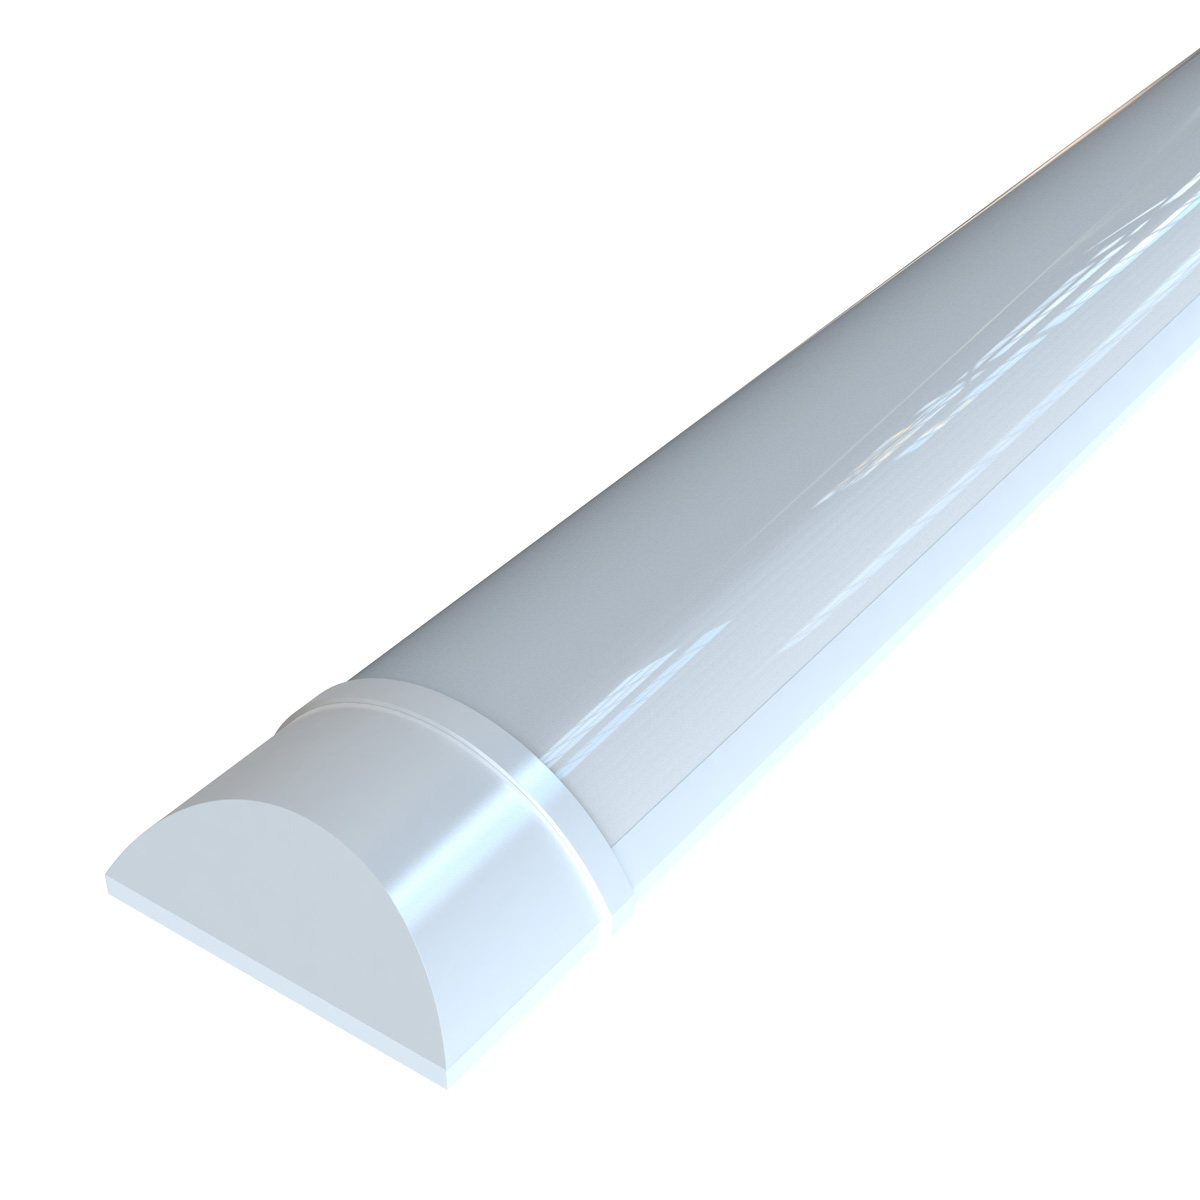 View 6 Foot 1800mm LED Batten 50w Cool or Natural White information